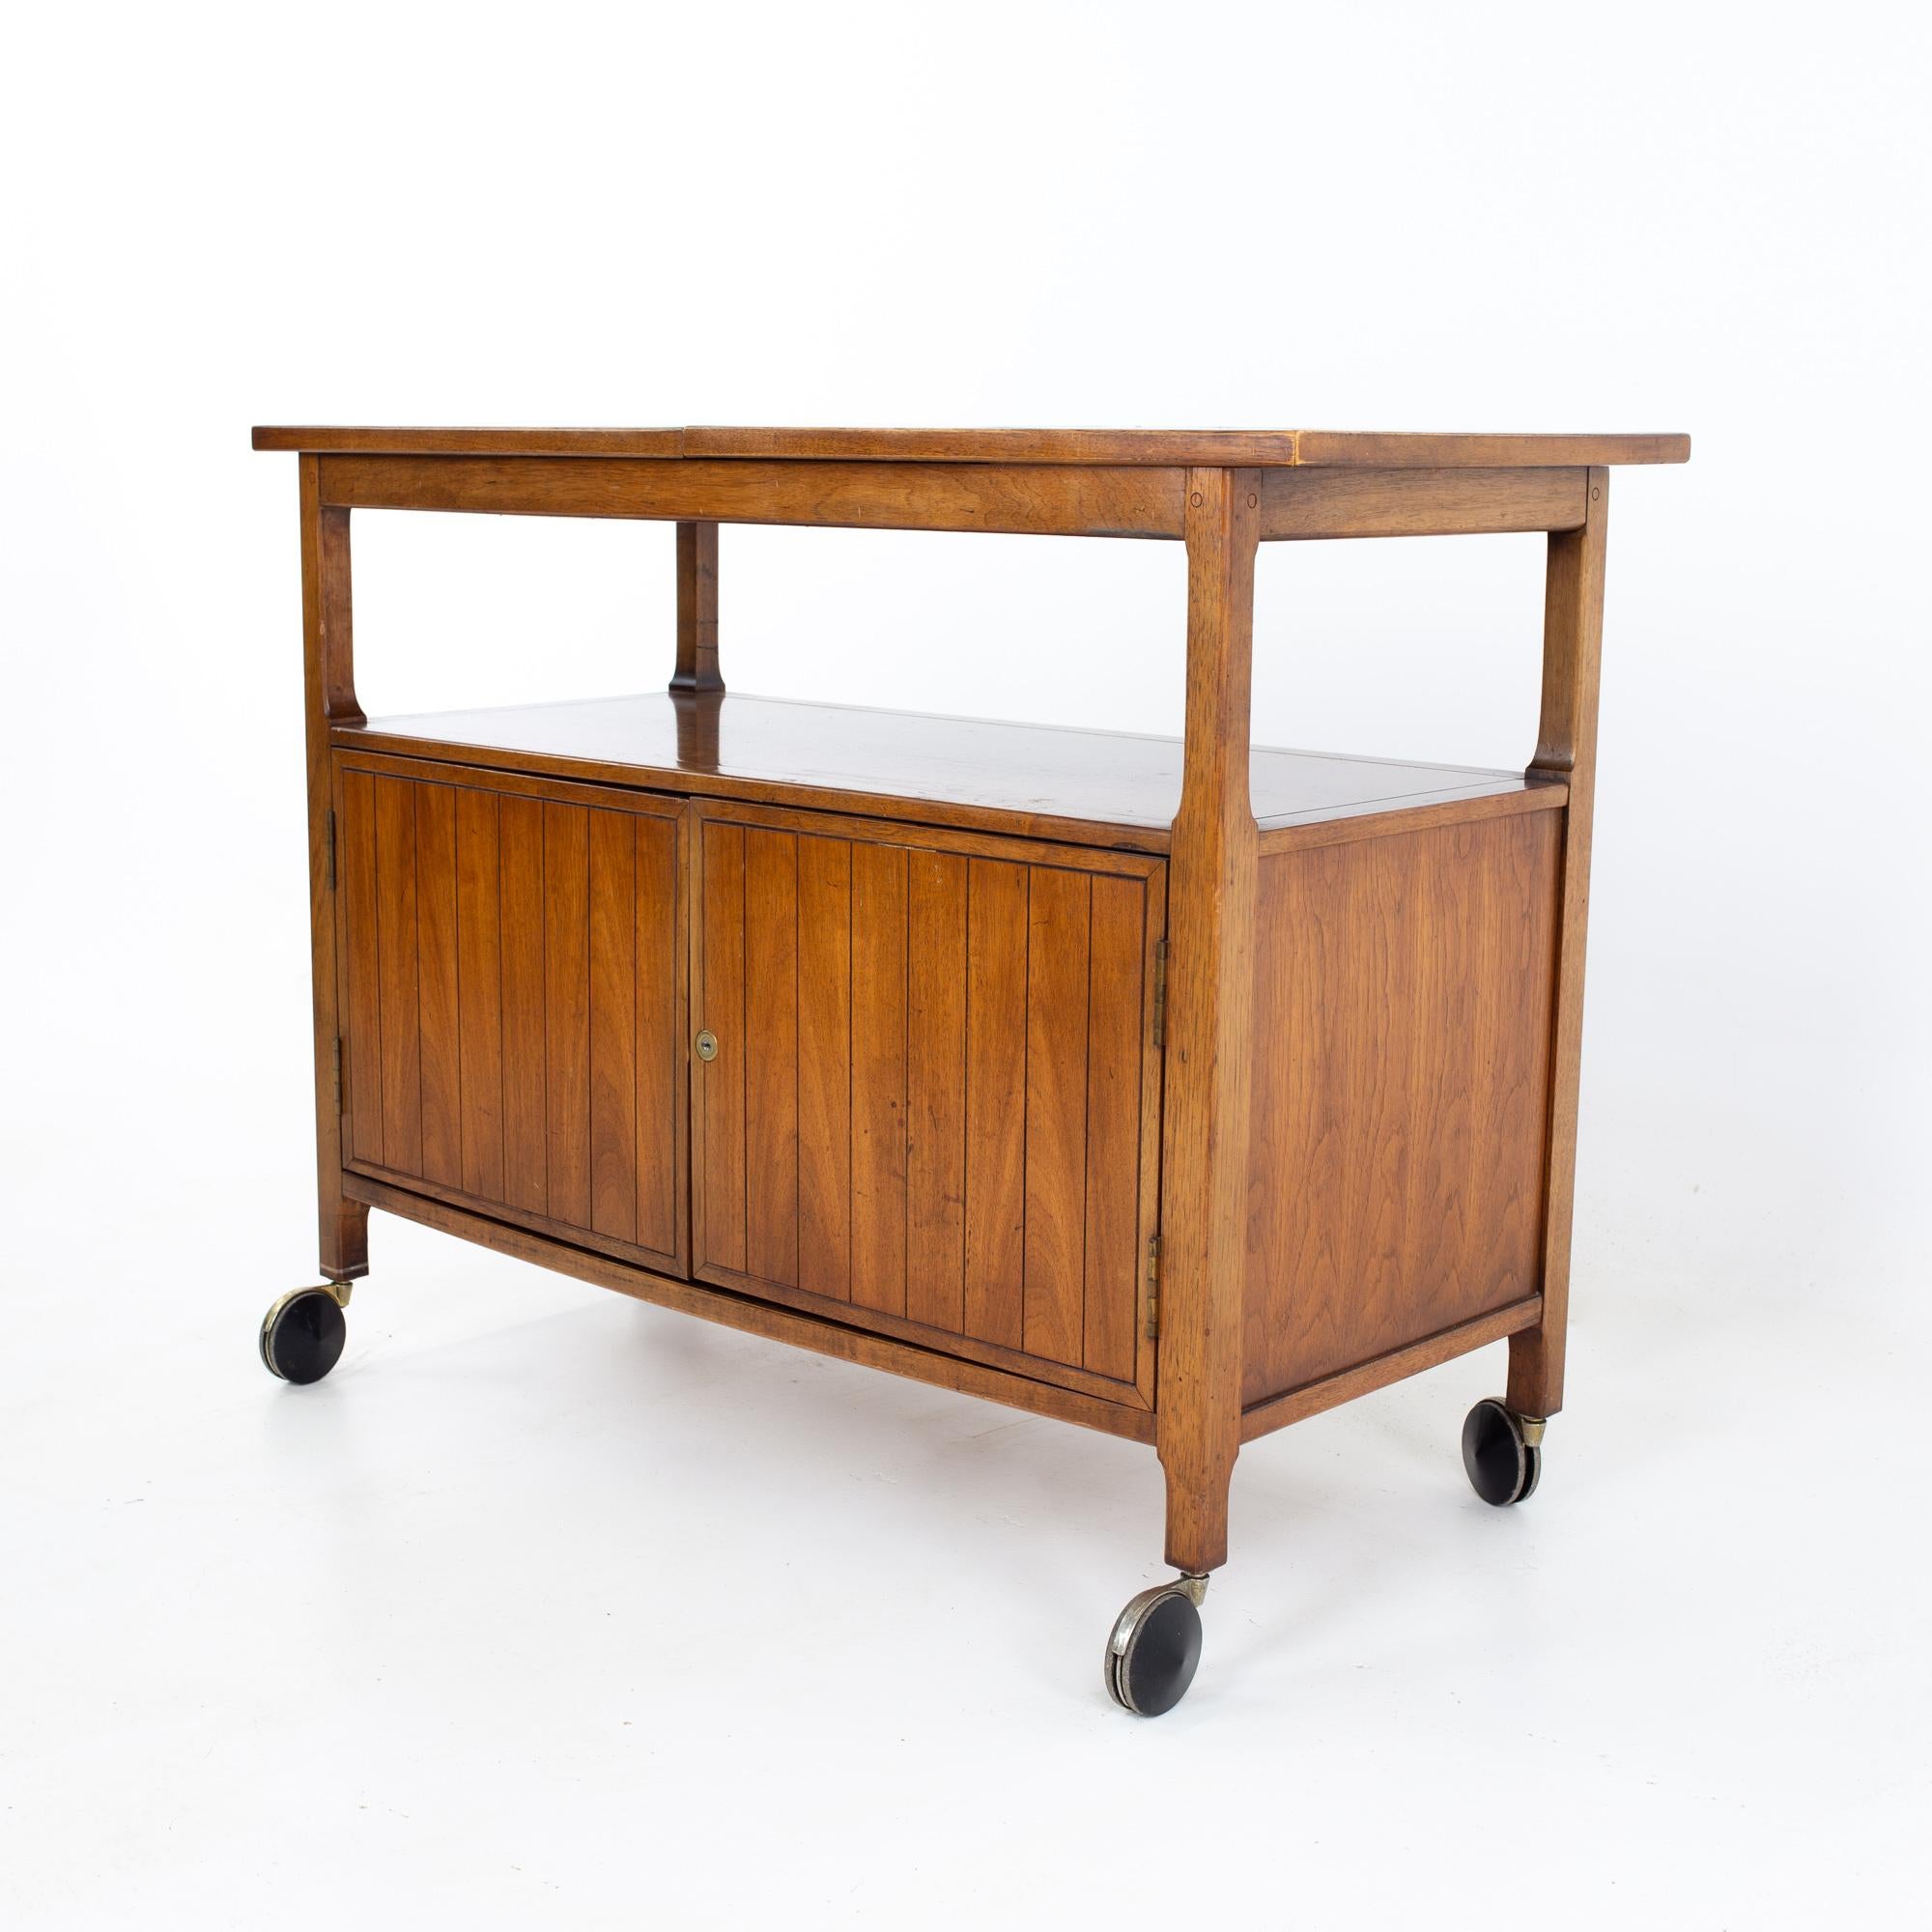 Mid century walnut and black laminate expanding bar cart
Bar cart measures: 40.25 wide x 18 deep x 30.75 inches high, when expanded, the cart is 57 inches wide

All pieces of furniture can be had in what we call restored vintage condition. That